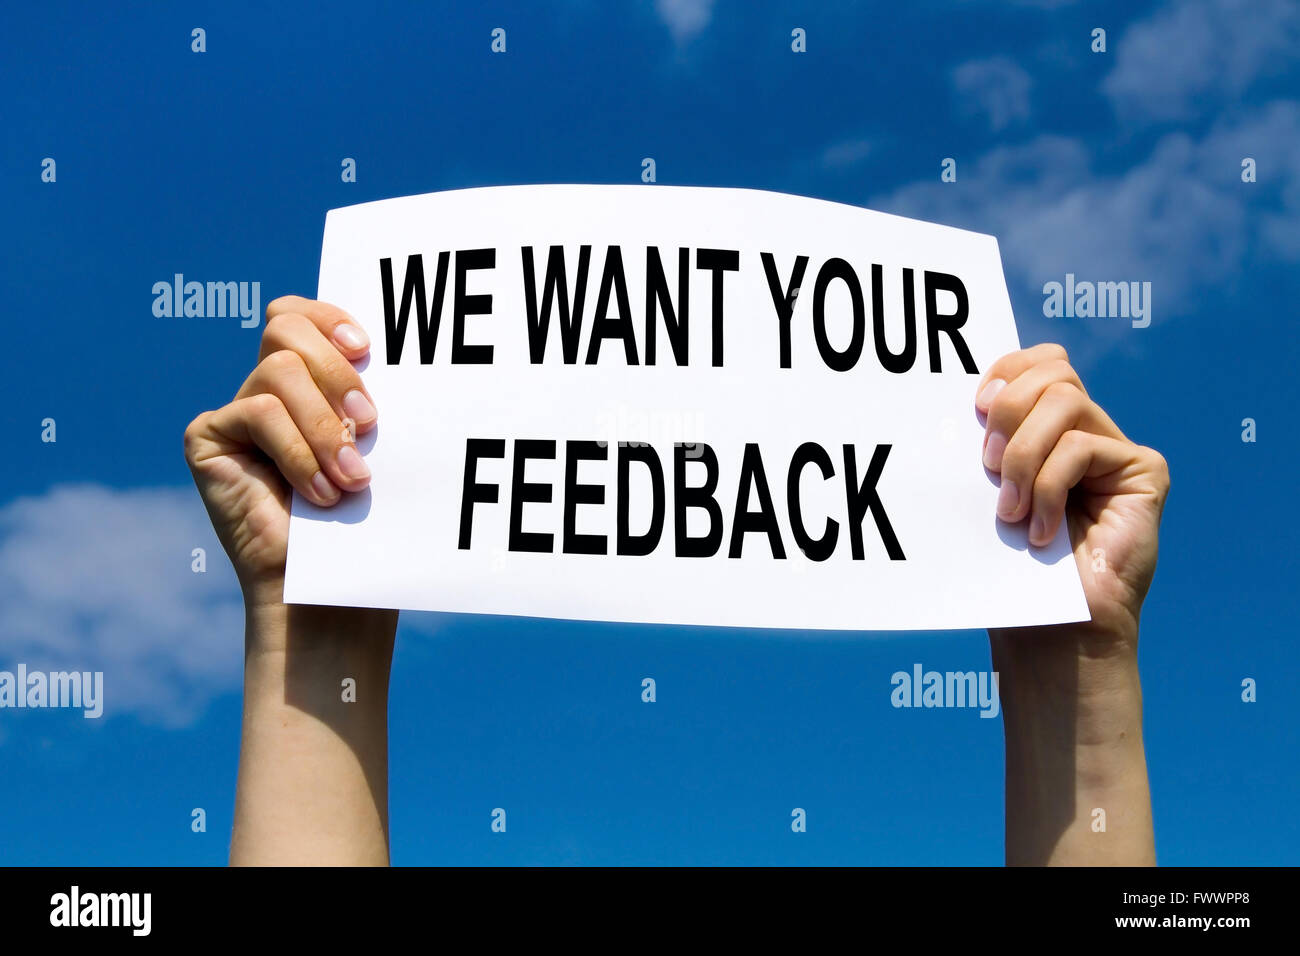 feedback concept, text with request of customer reviews and scores Stock Photo